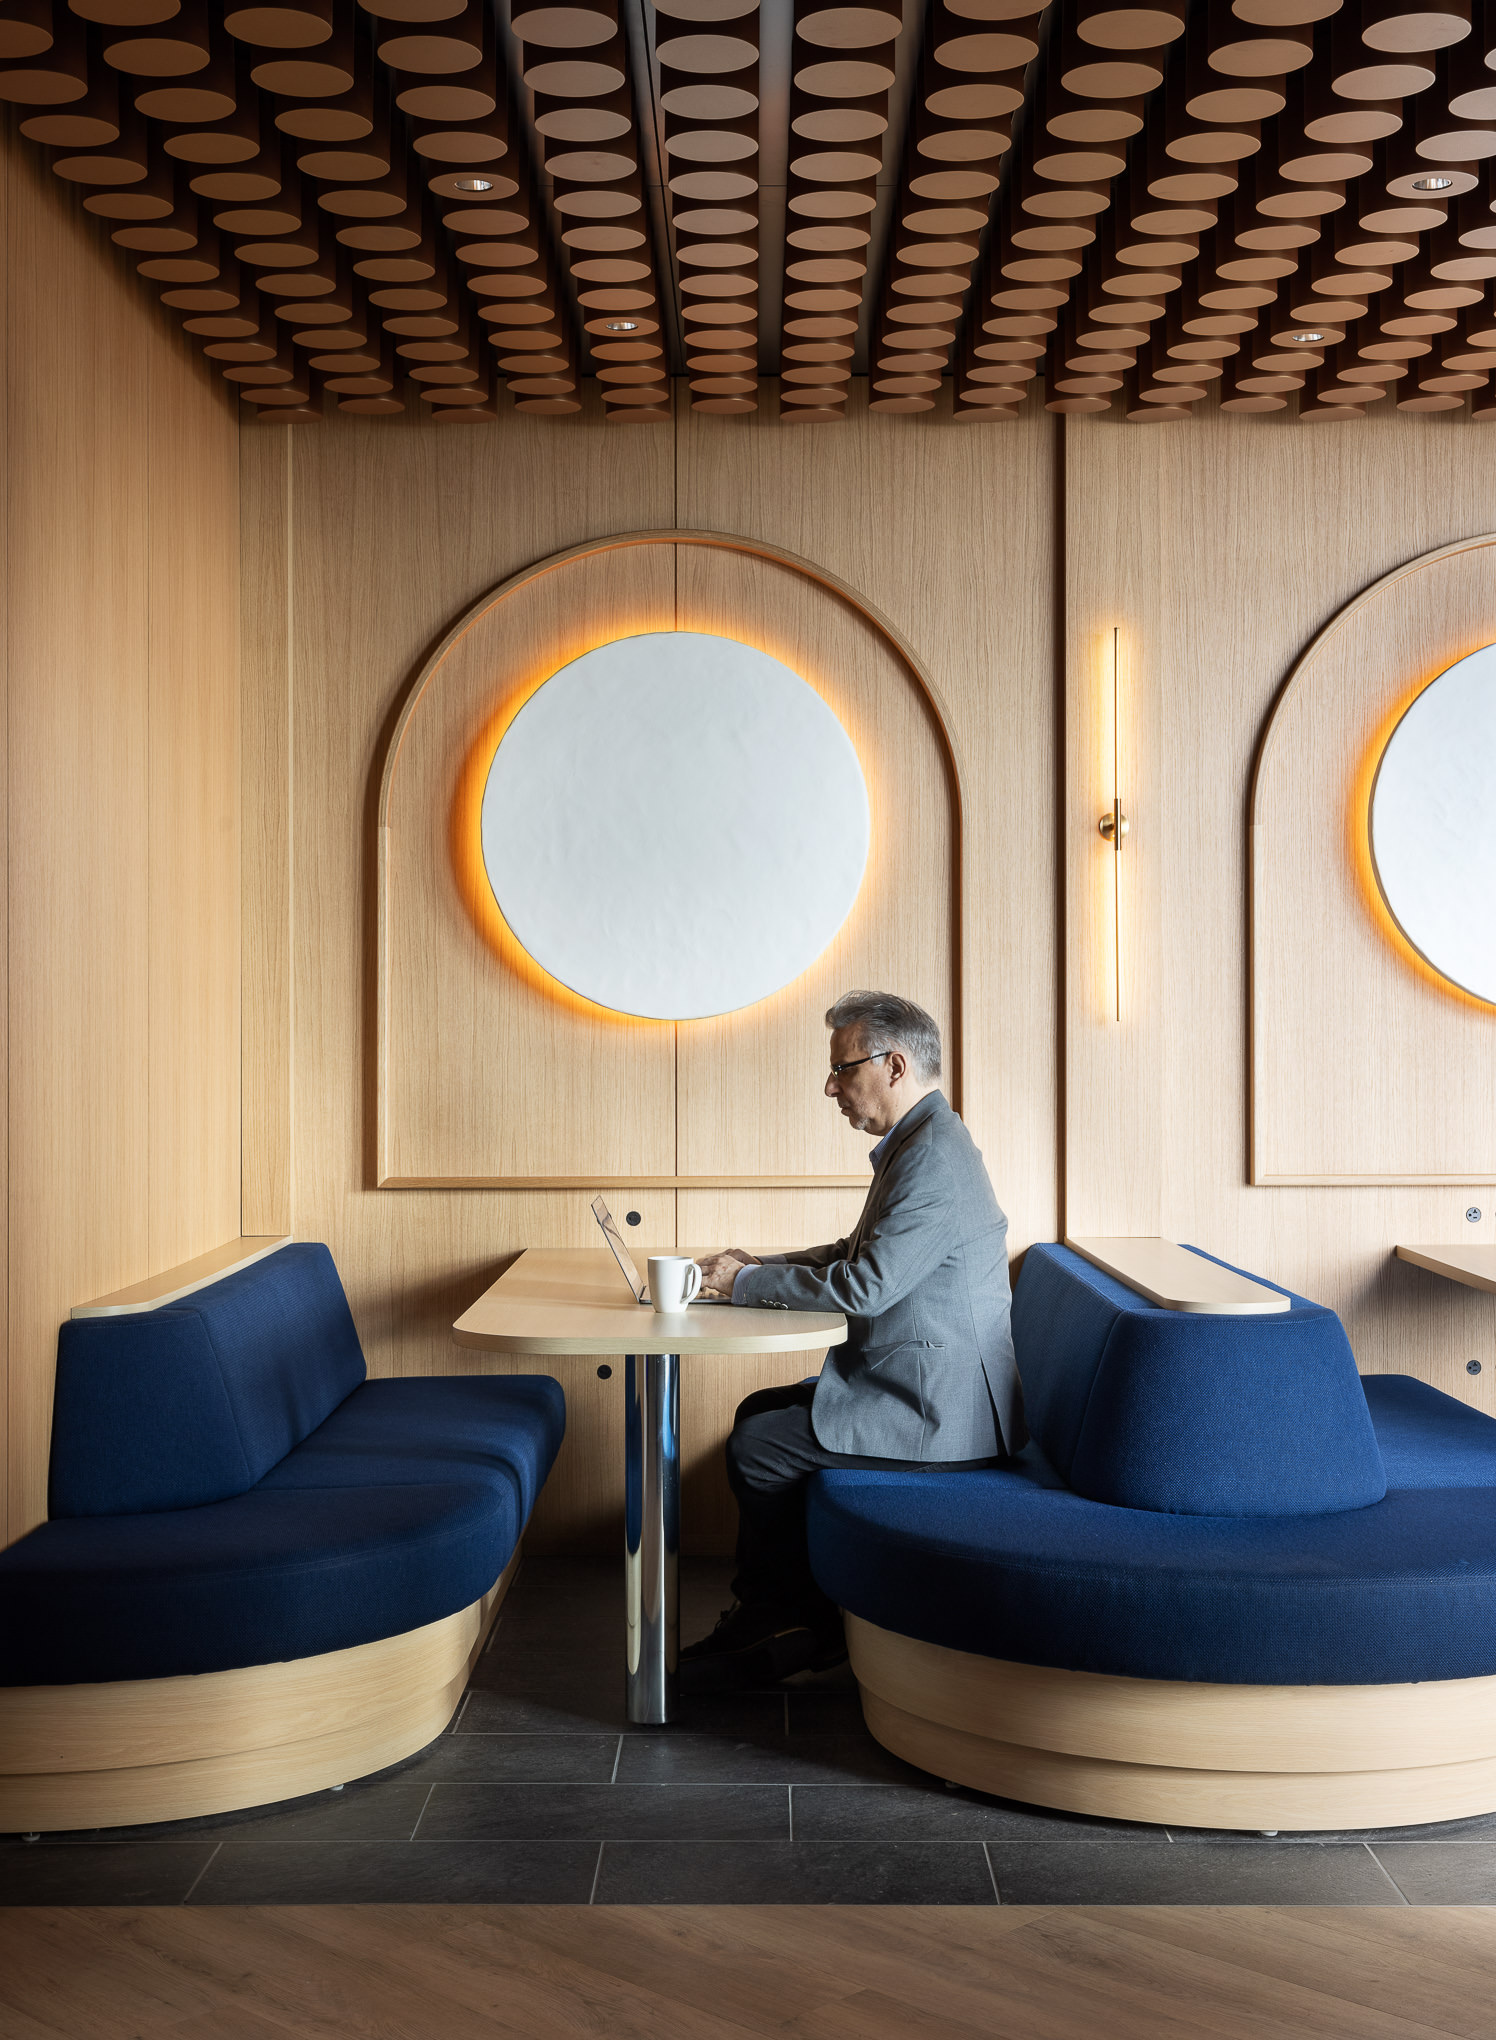 Elegant cafe interior featuring curved dark blue banquettes and warm wooden wall panels with circular cutouts and backlit accents. A gentleman in a grey suit works at a round table, highlighting the space's modern yet inviting ambiance.